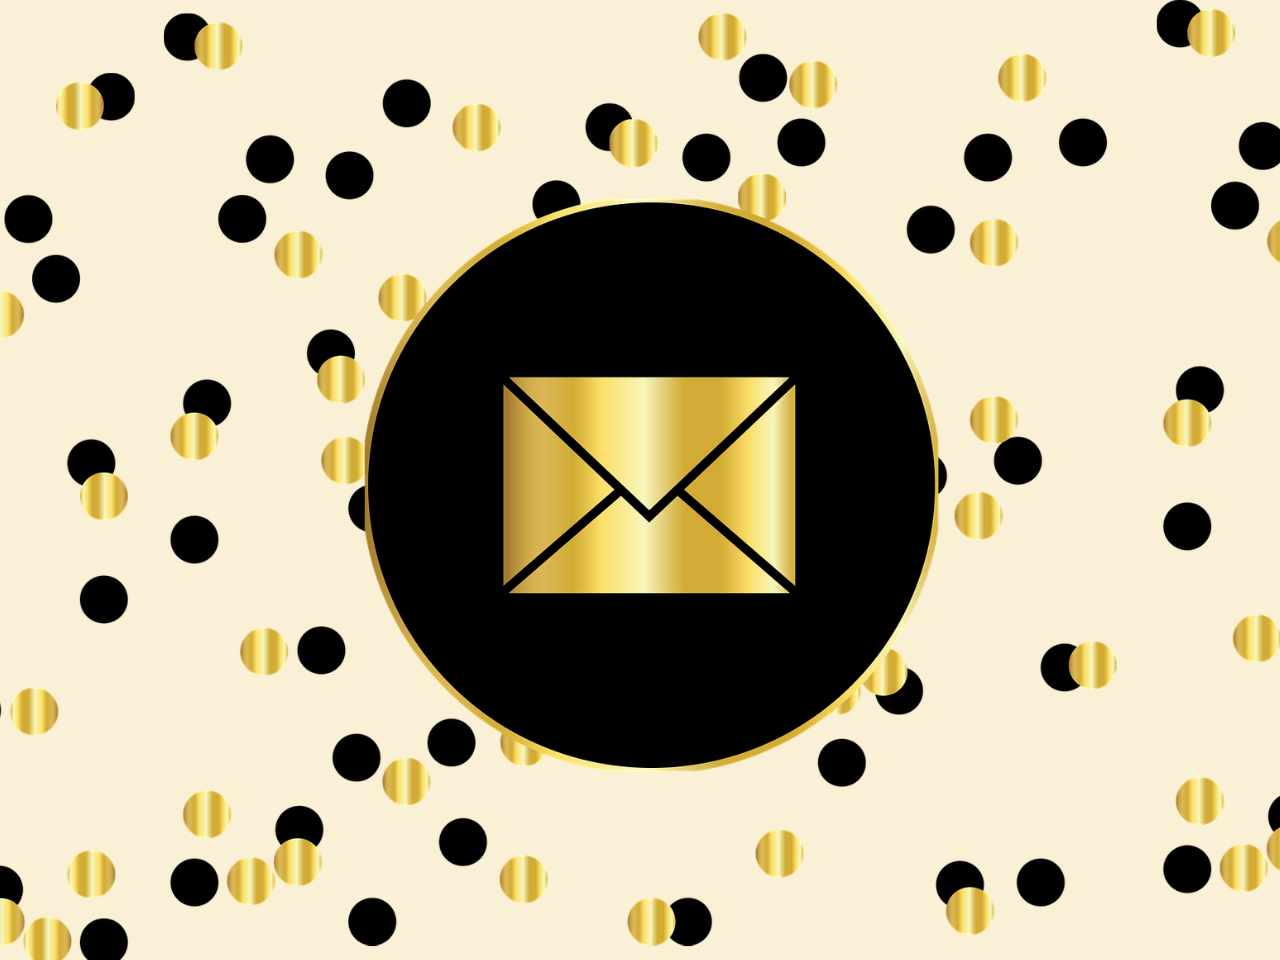 Email sets the gold standard for Healthcare Professional communication